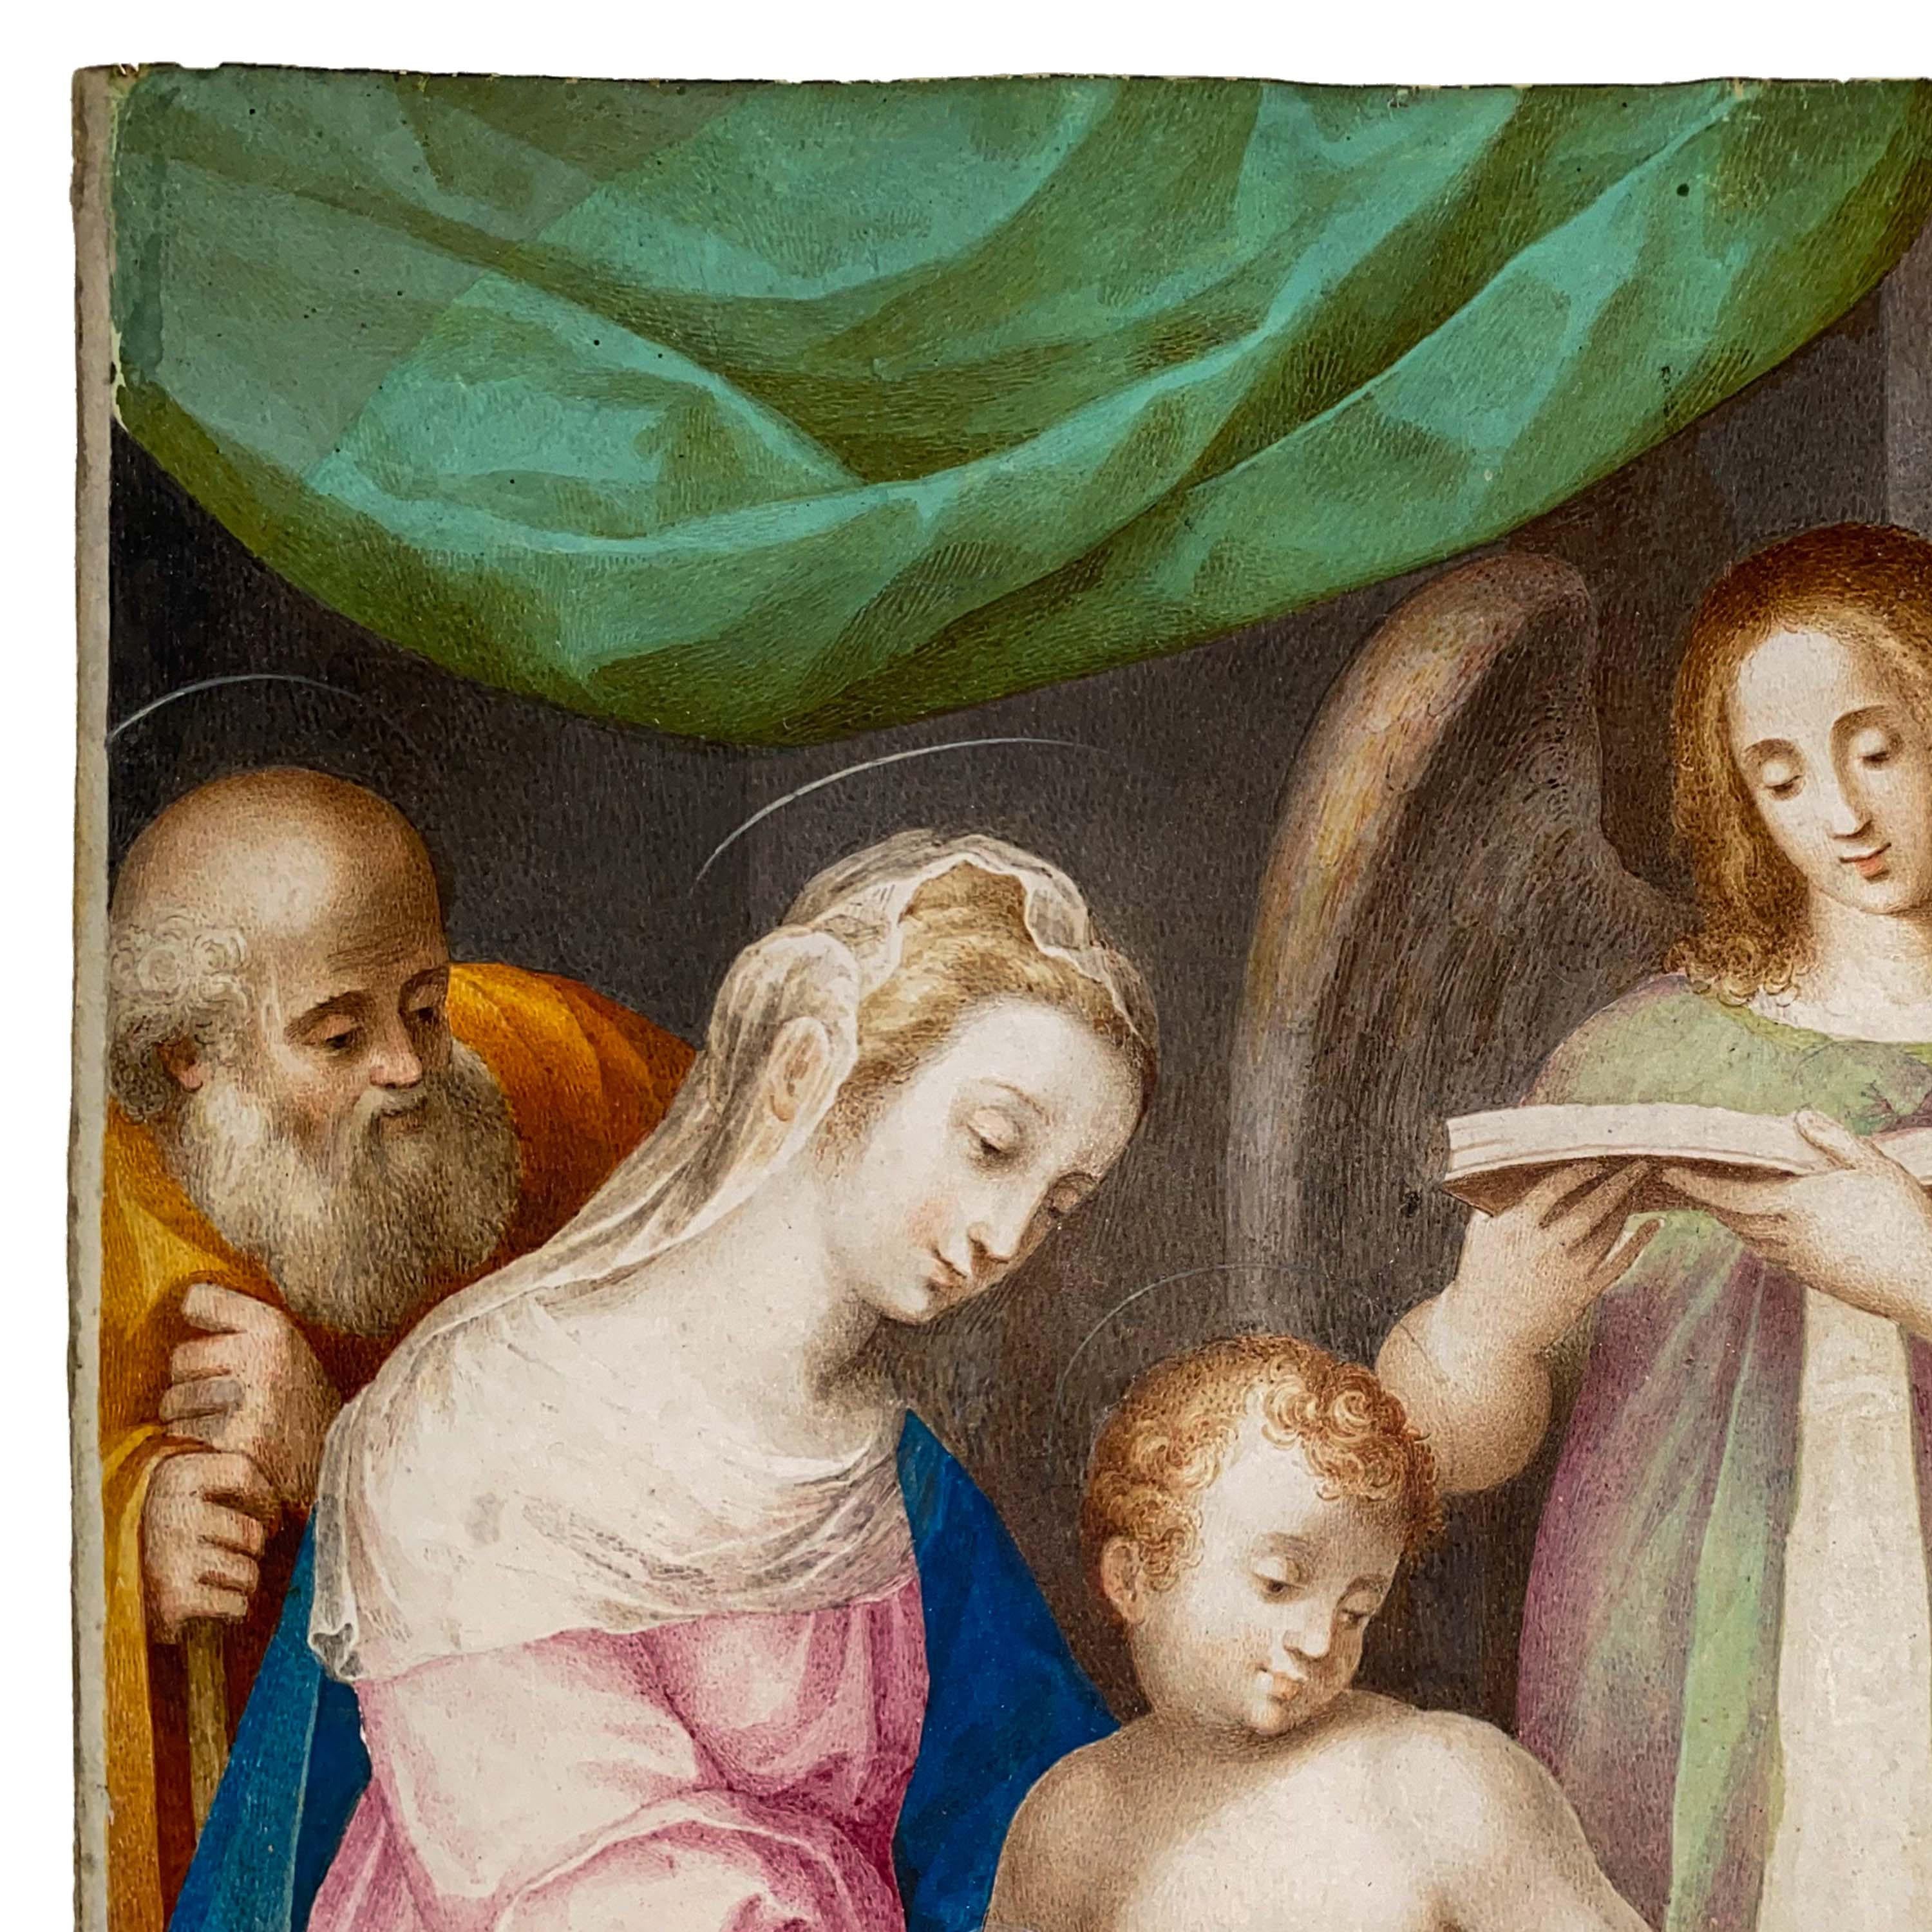 Italian Renaissance Tempera on Parchment Painting Holy Family by Giuseppe Cesari - Brown Figurative Painting by GIUSEPPE CESARI IL CAVALIER D'ARPINO